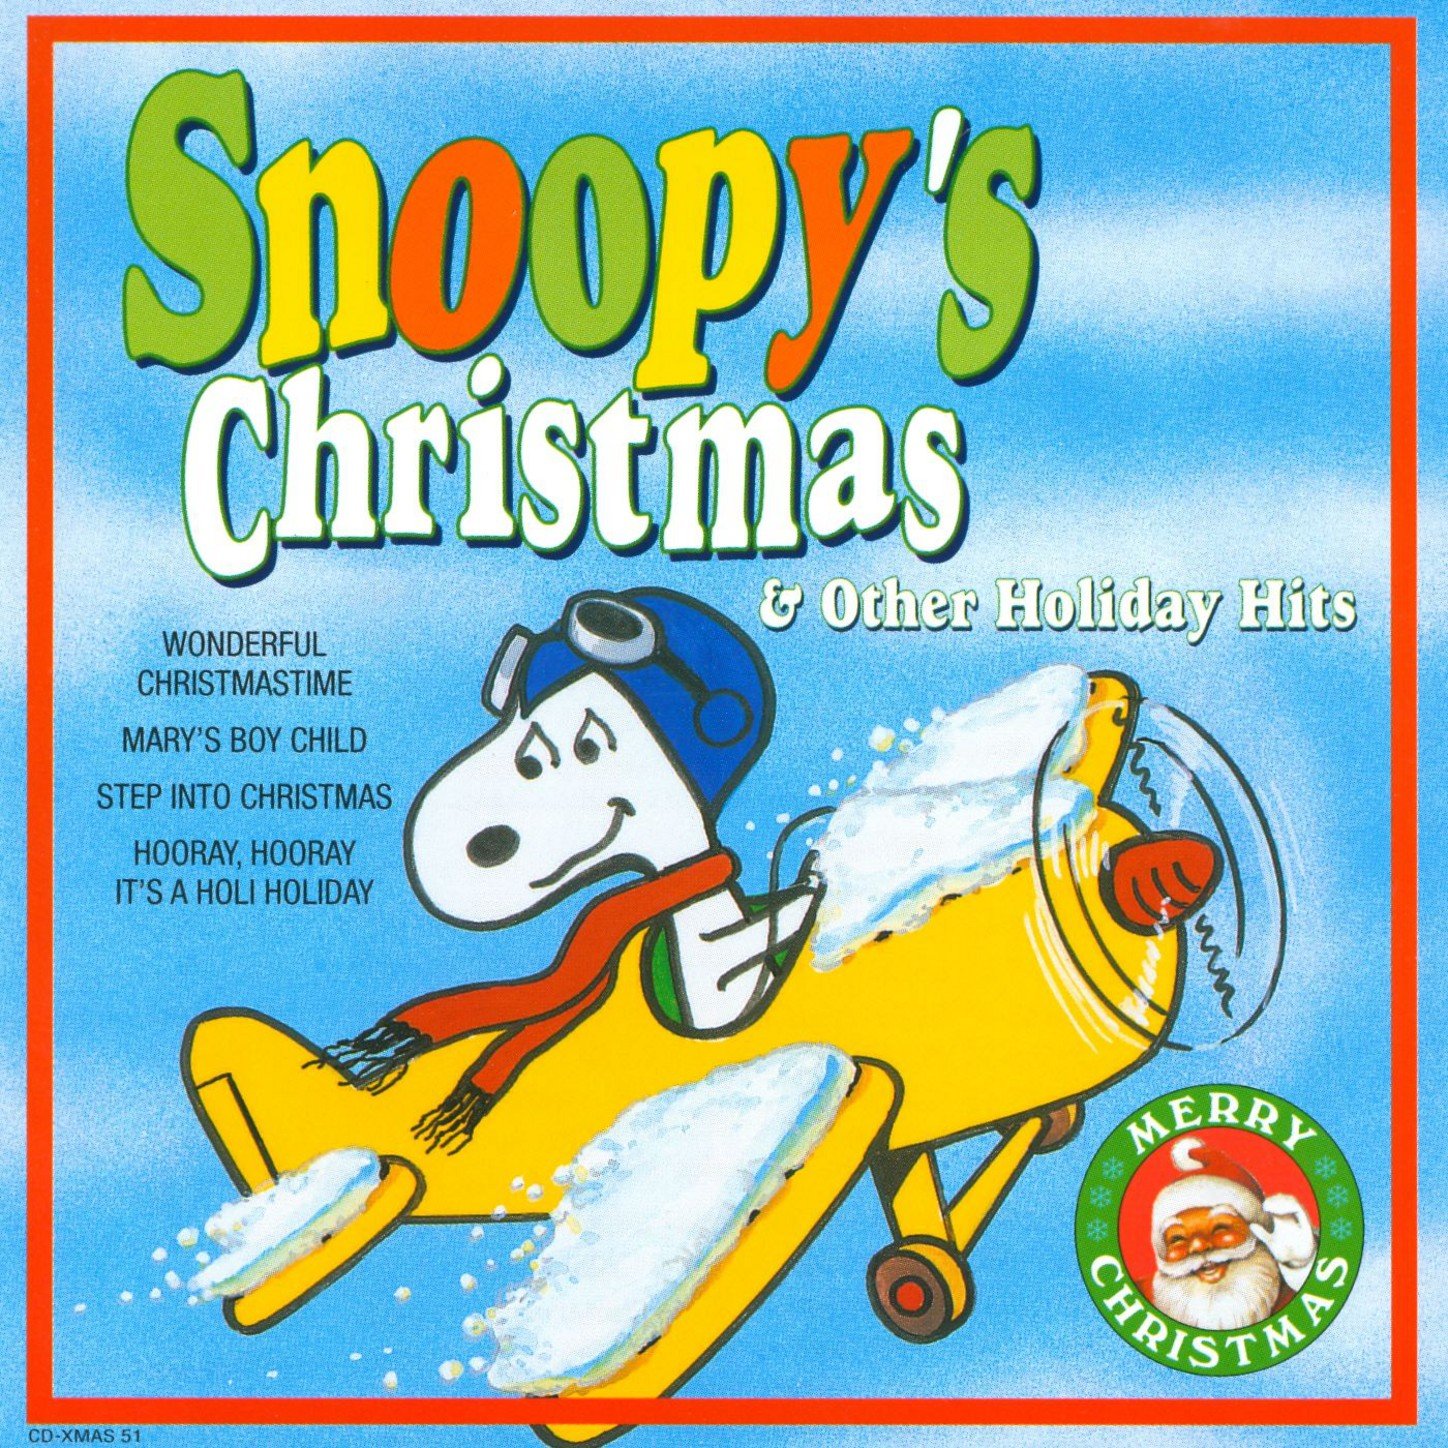 Snoopy's Christmas & Other Holiday Hits